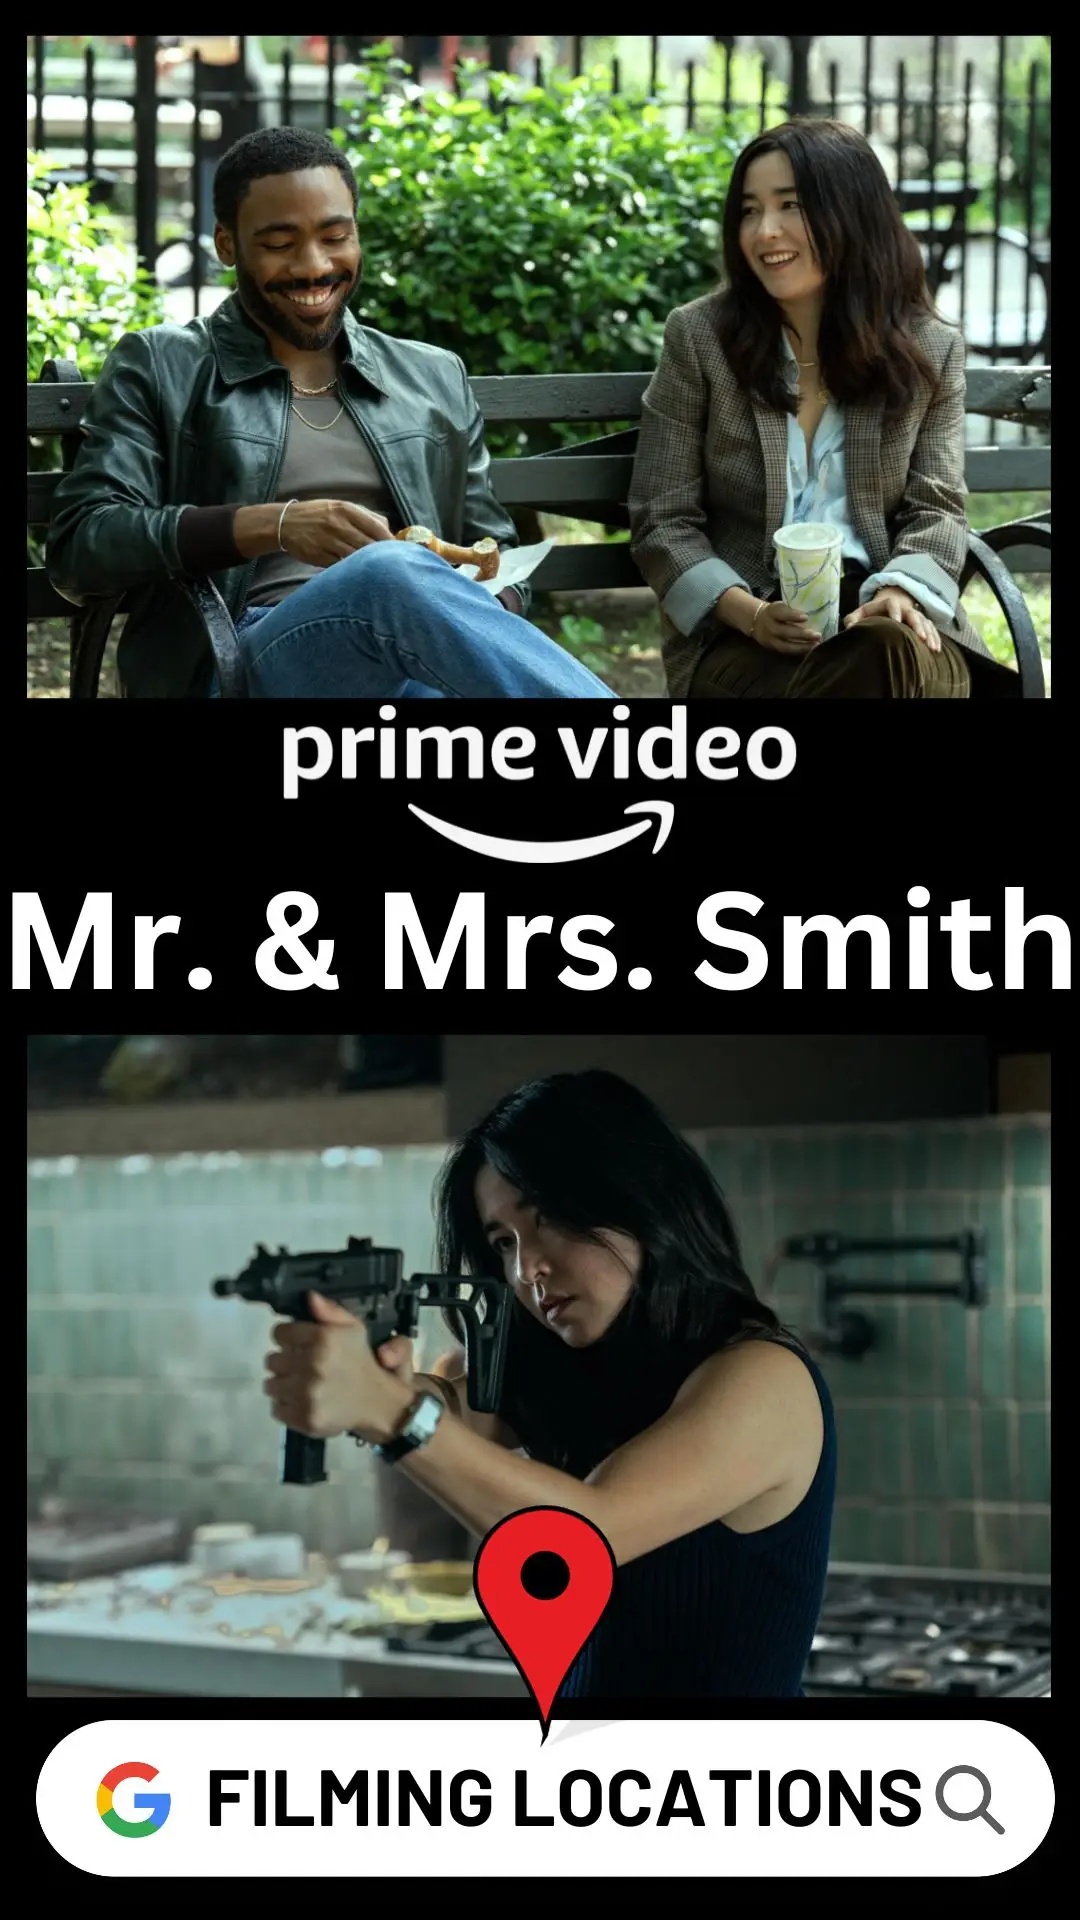 Mr. & Mrs. Smith Filming Locations